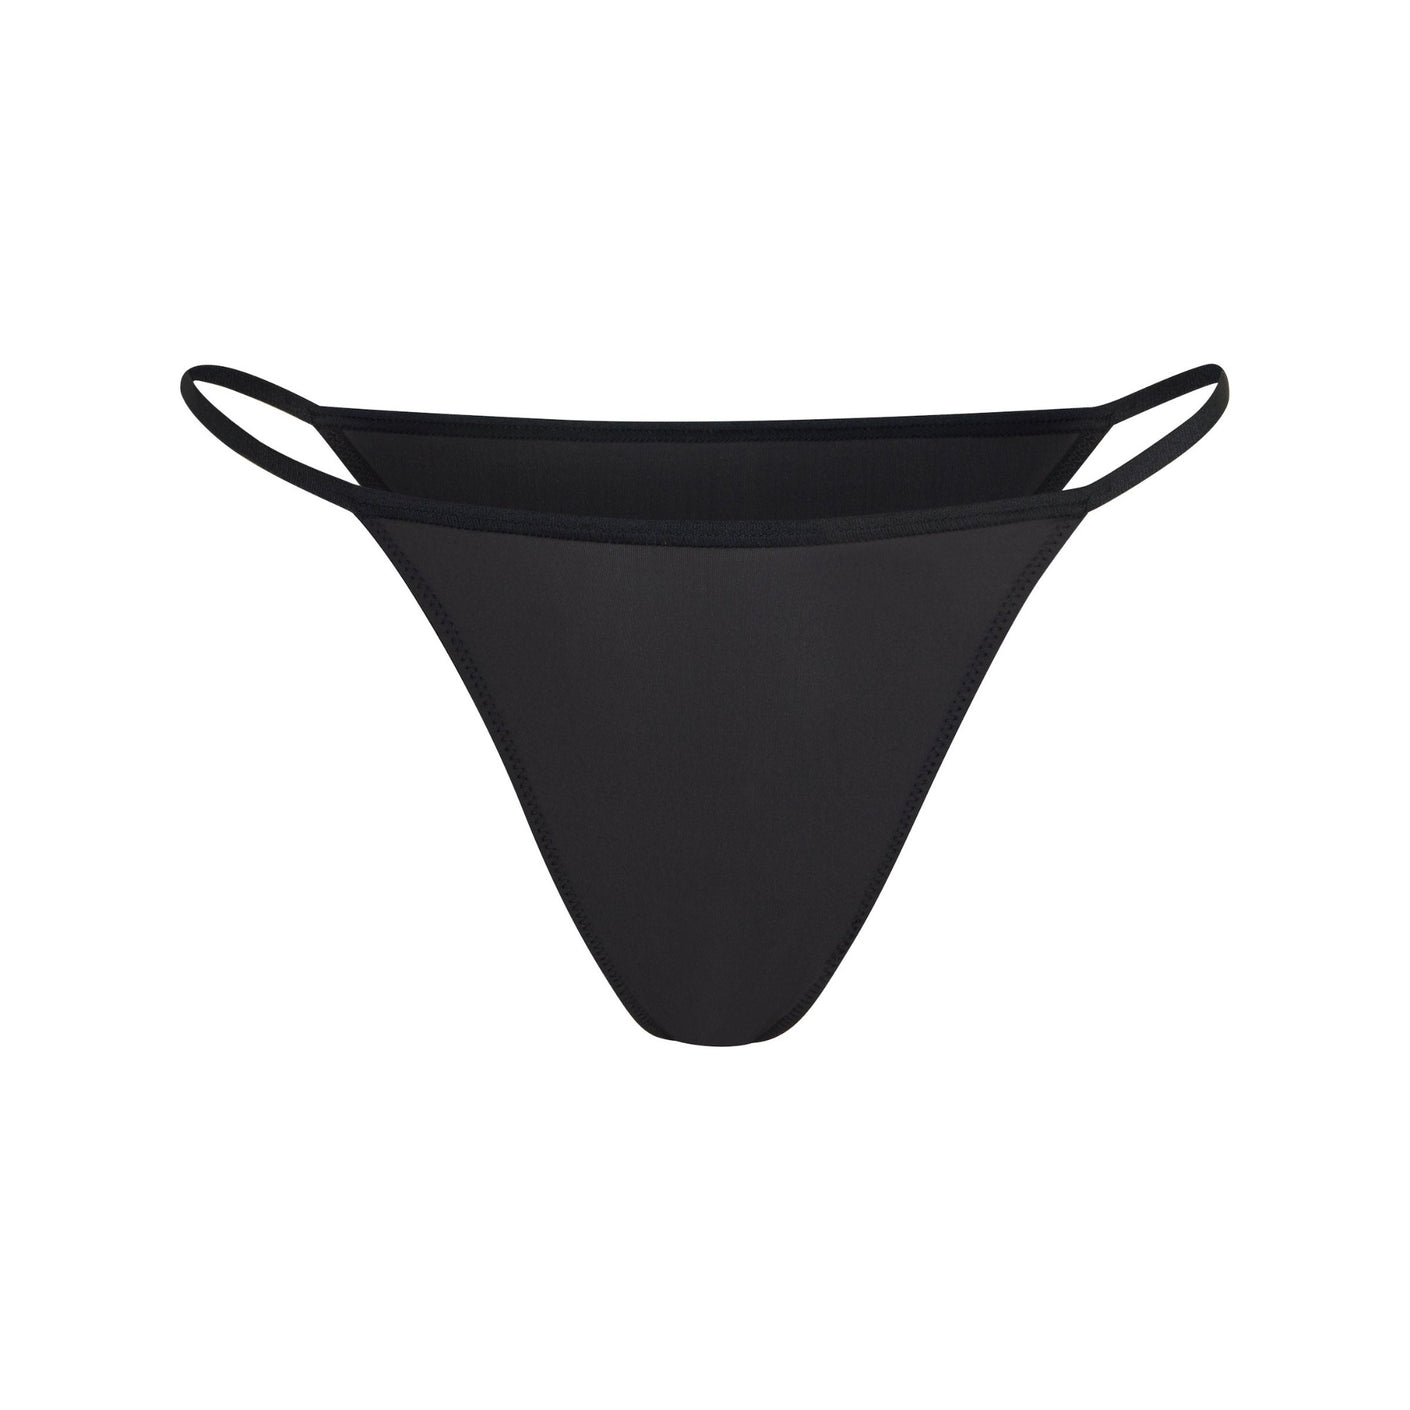 I did a Skims haul including the 'micro thong' - it needed more